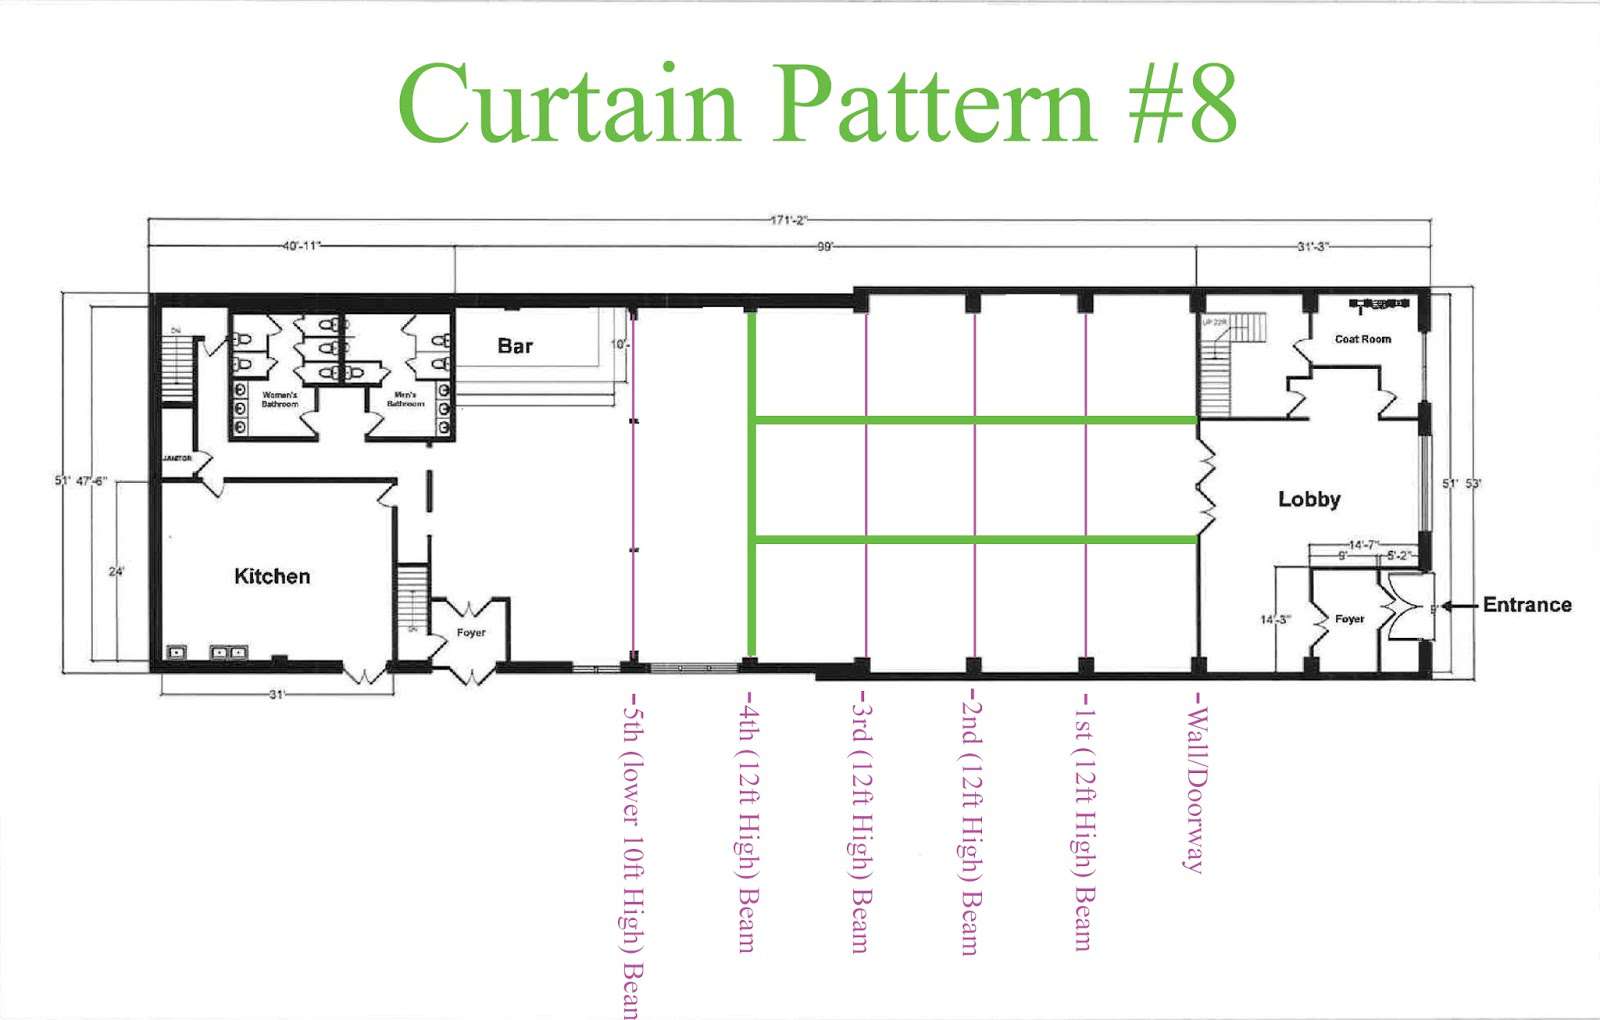 Curtains are hanging across the width of the Main Room at 26 Bridge under the 4th Beam and hanging the length of the room between 4th Bean and Entrance wall on the Bar-Side of The Main Room and NON-Bar-Side of The Main Room.